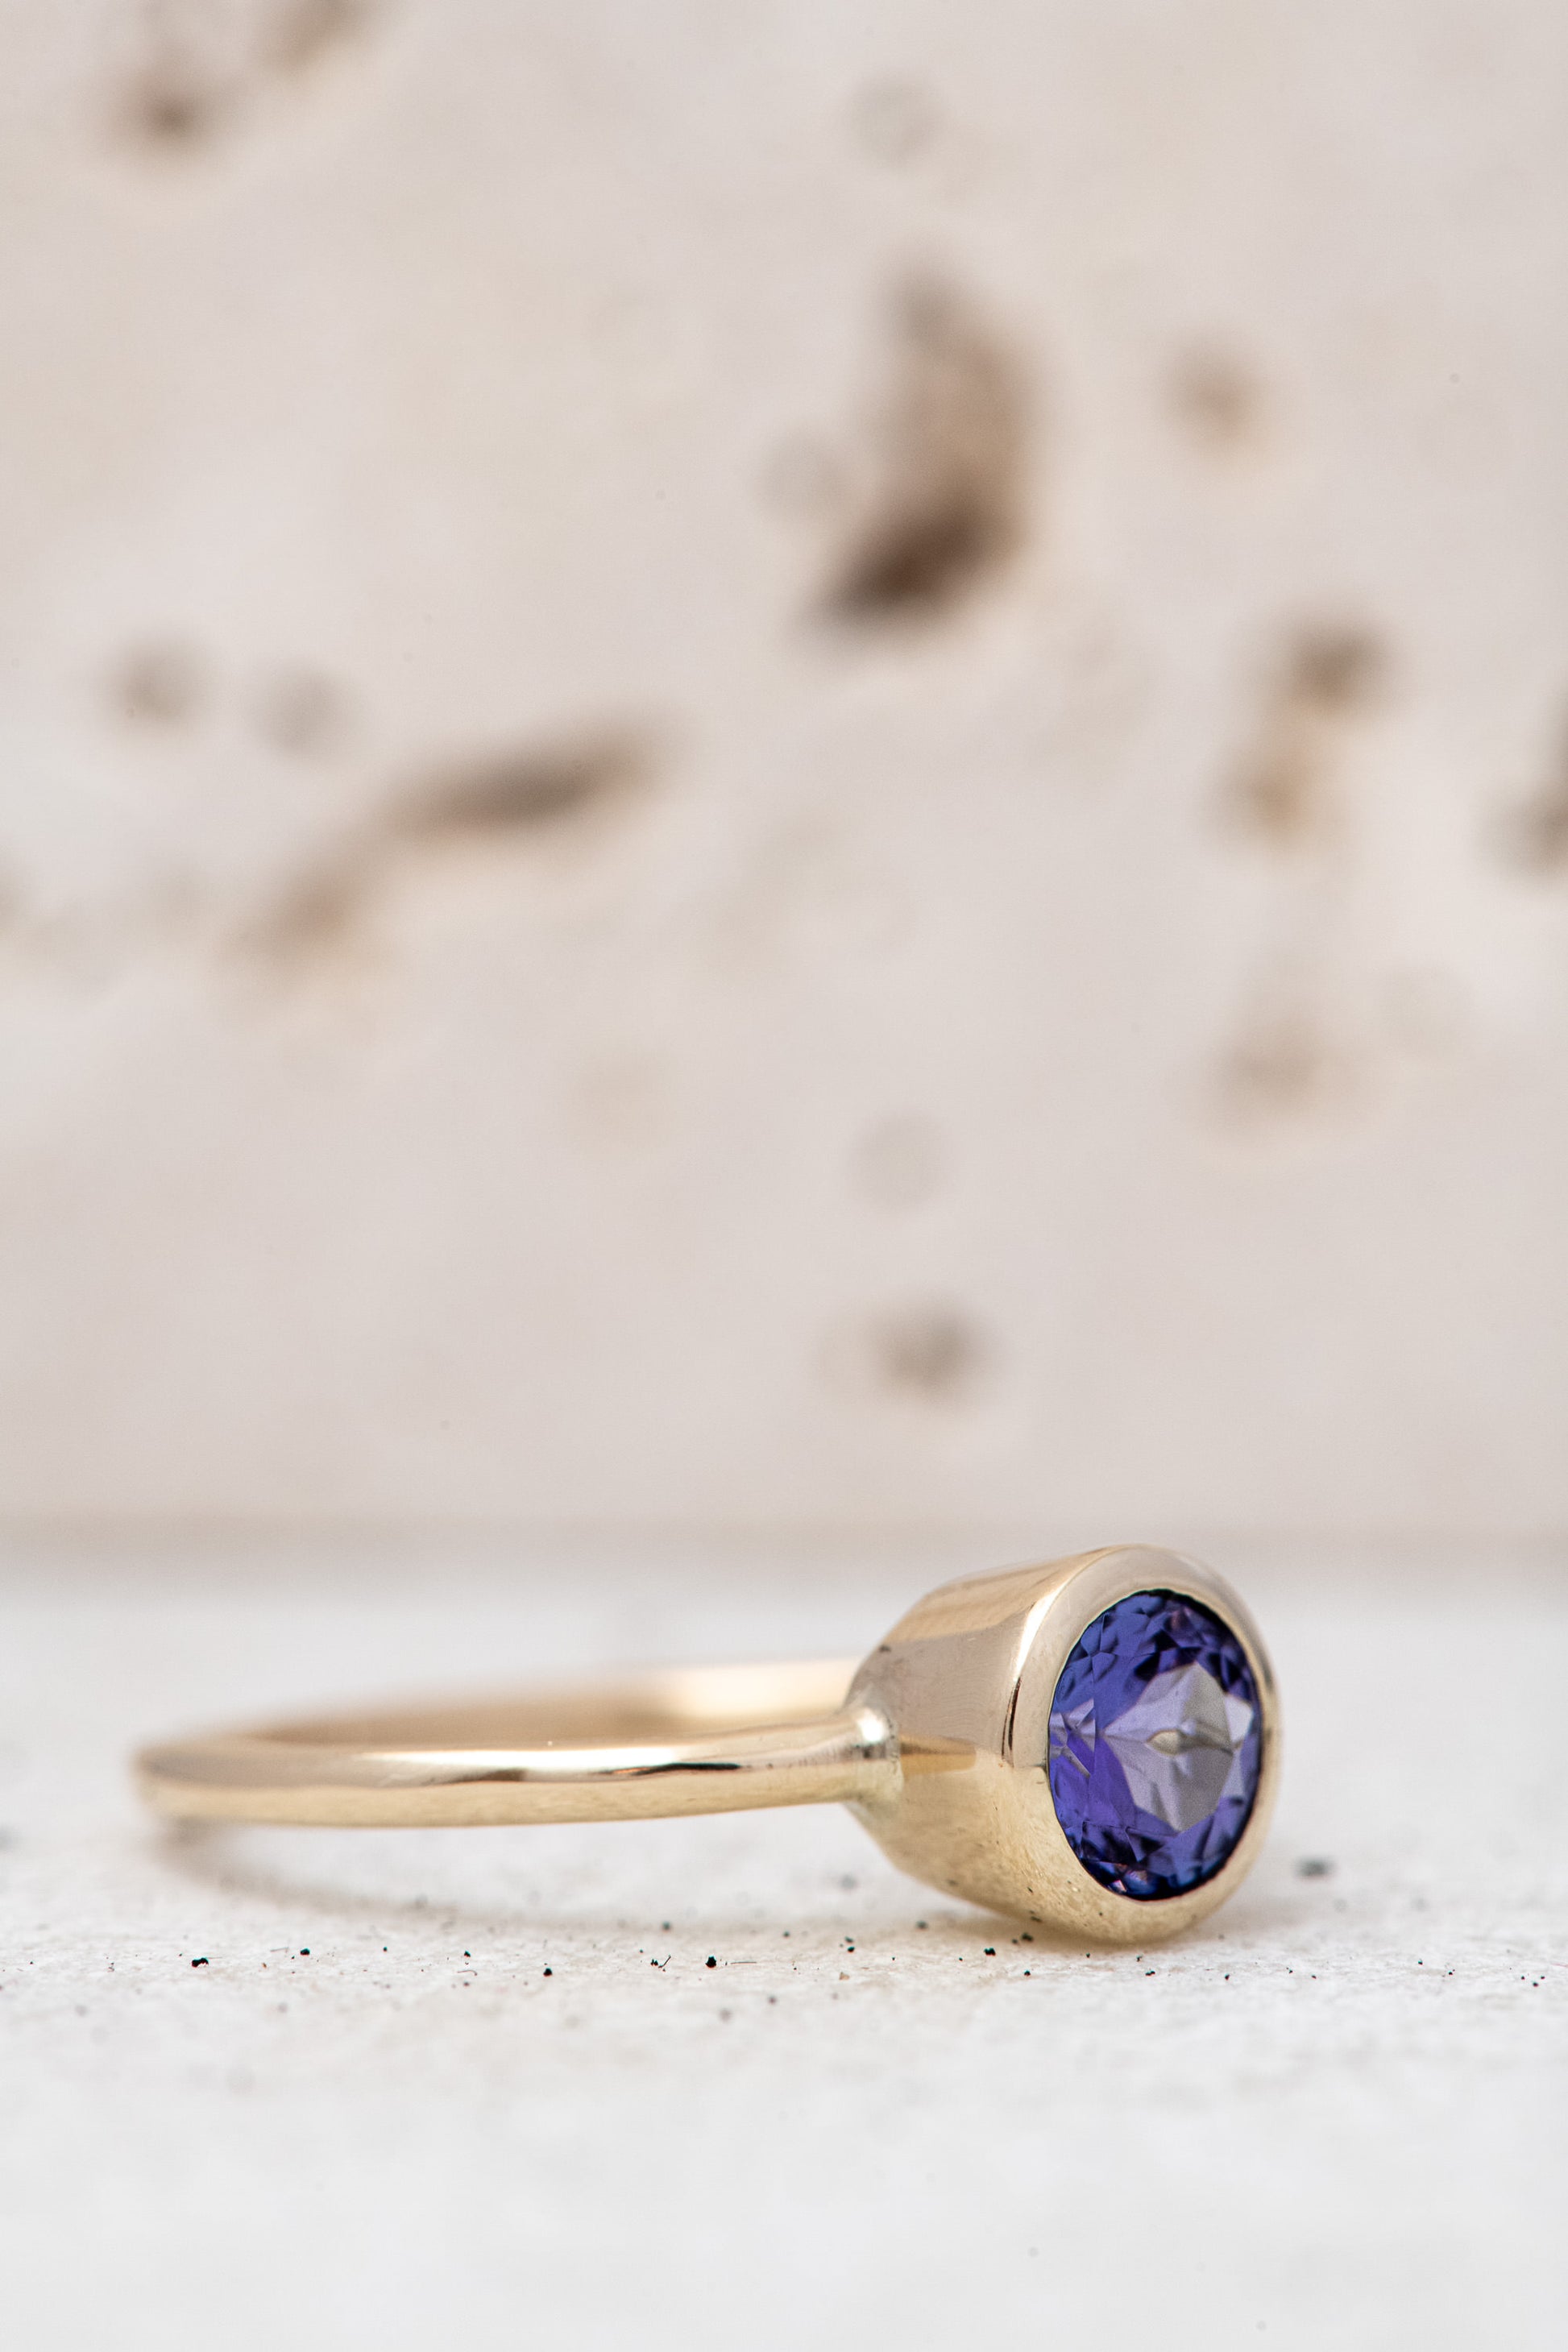 A yellow gold Round Tanzanite Solitaire Ring handmade by Cassin Jewelry.